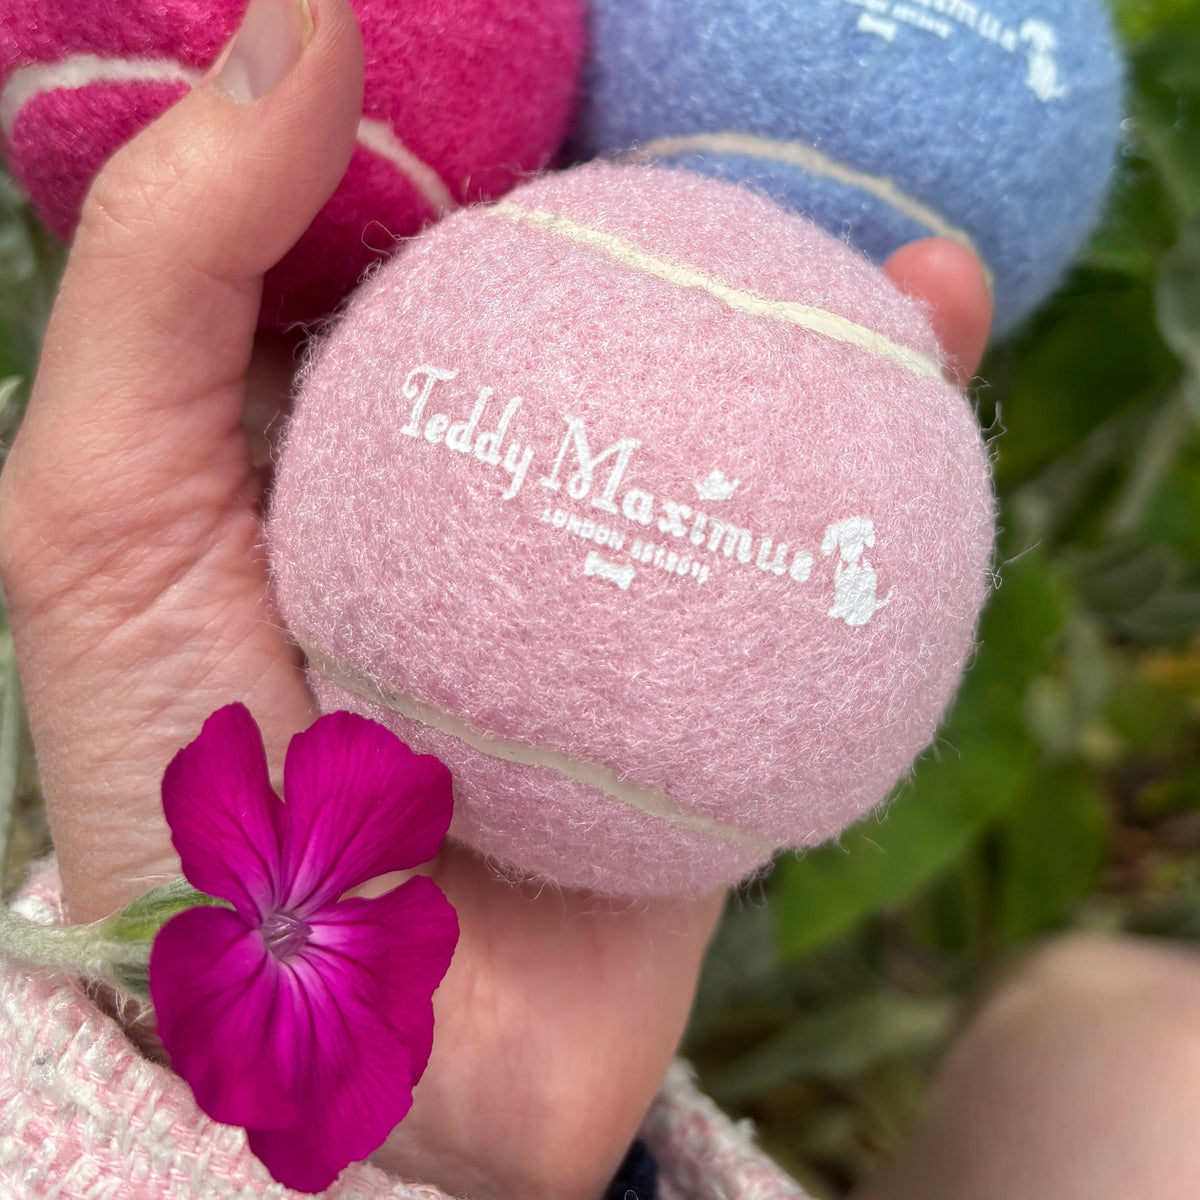 Pawfect Pink Dog Ball Toy by Teddy Maximus